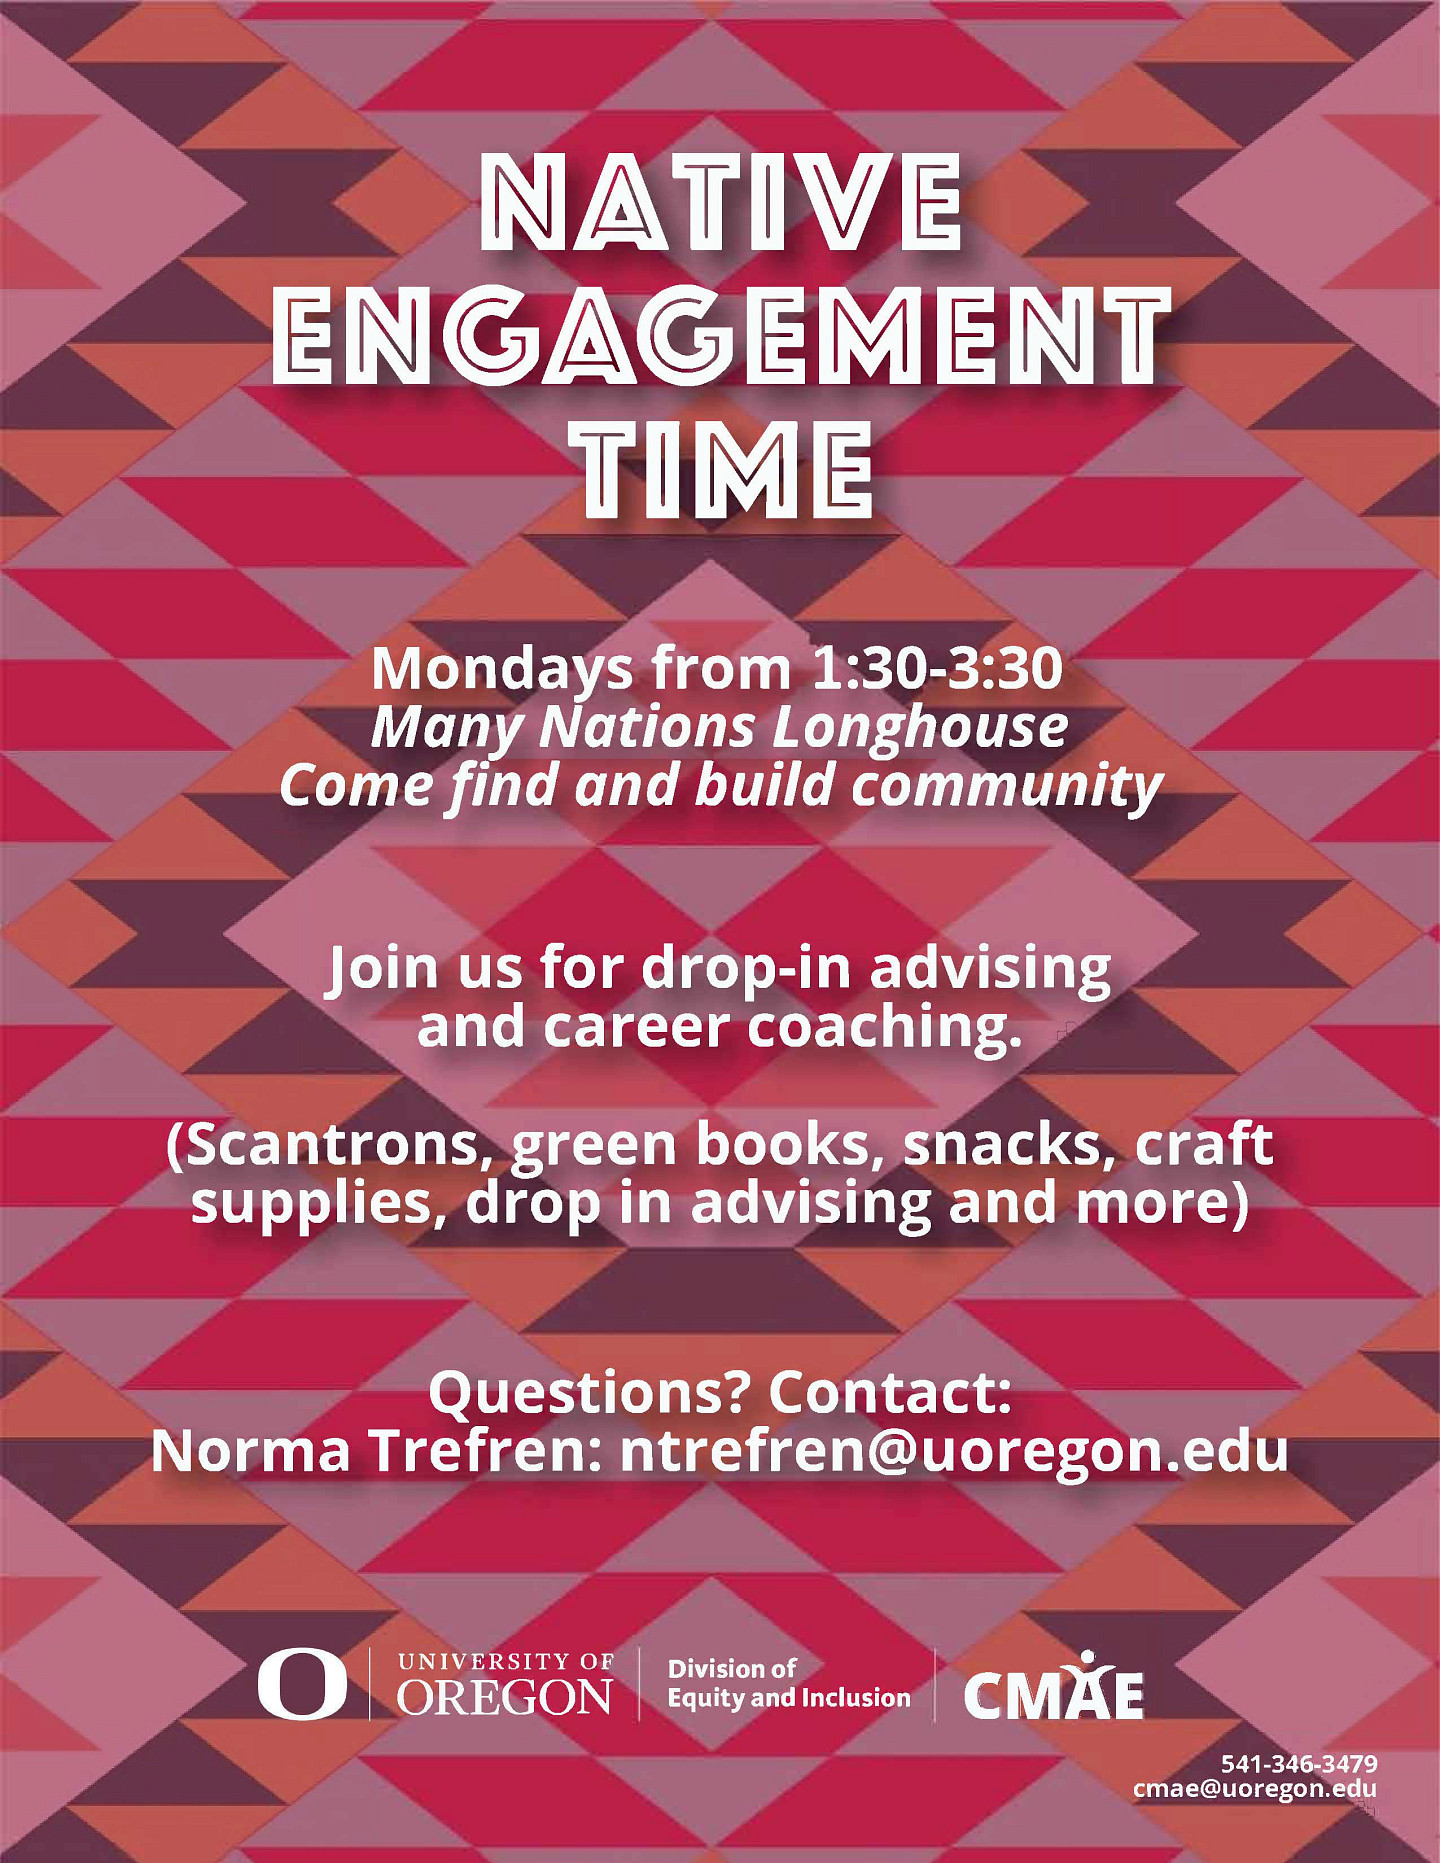 Details for Native Engagement Time